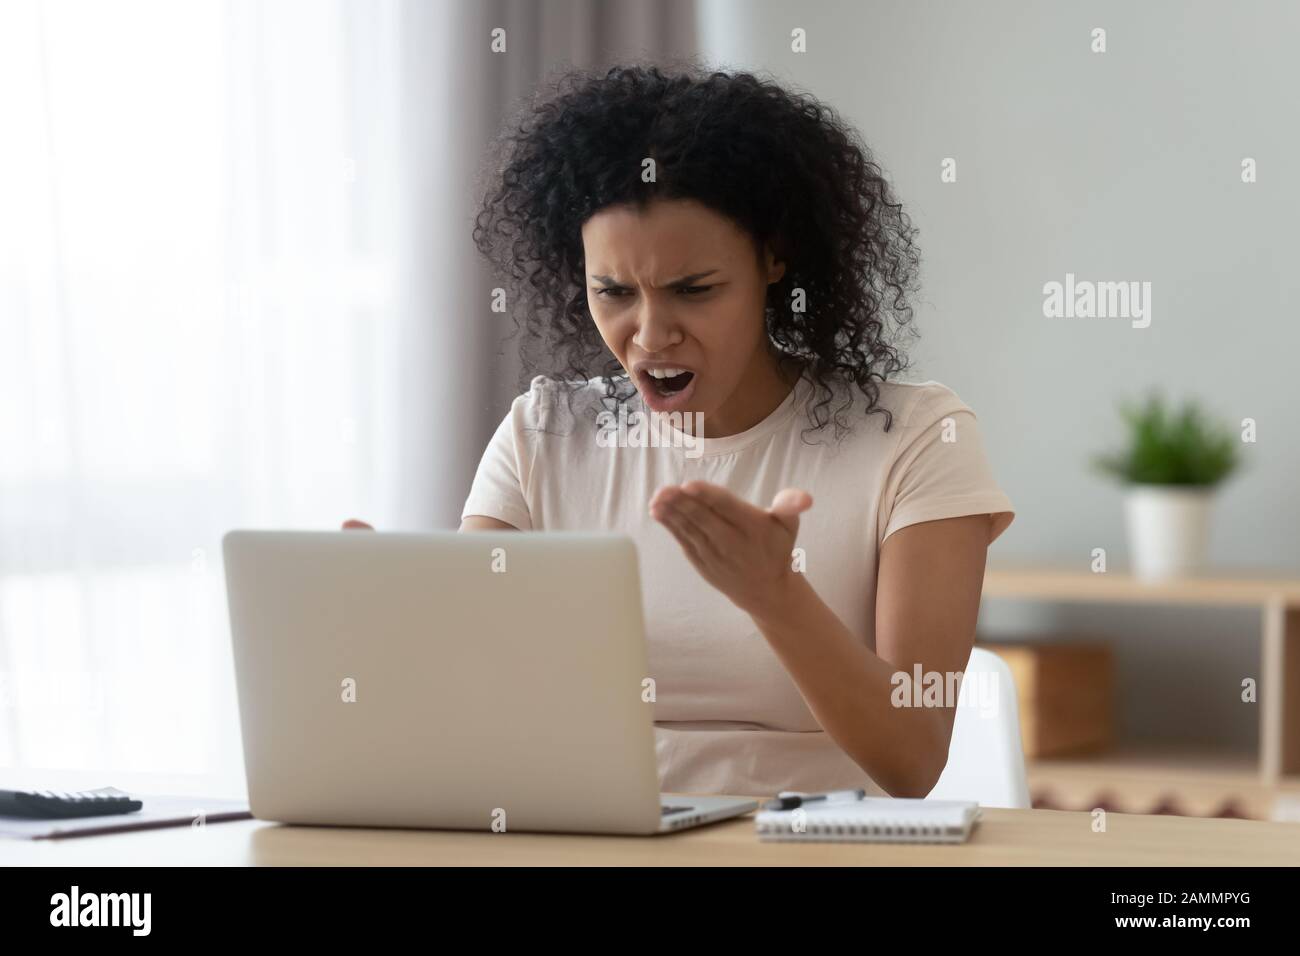 Irritated woman swears at broken or hanging out computer Stock Photo